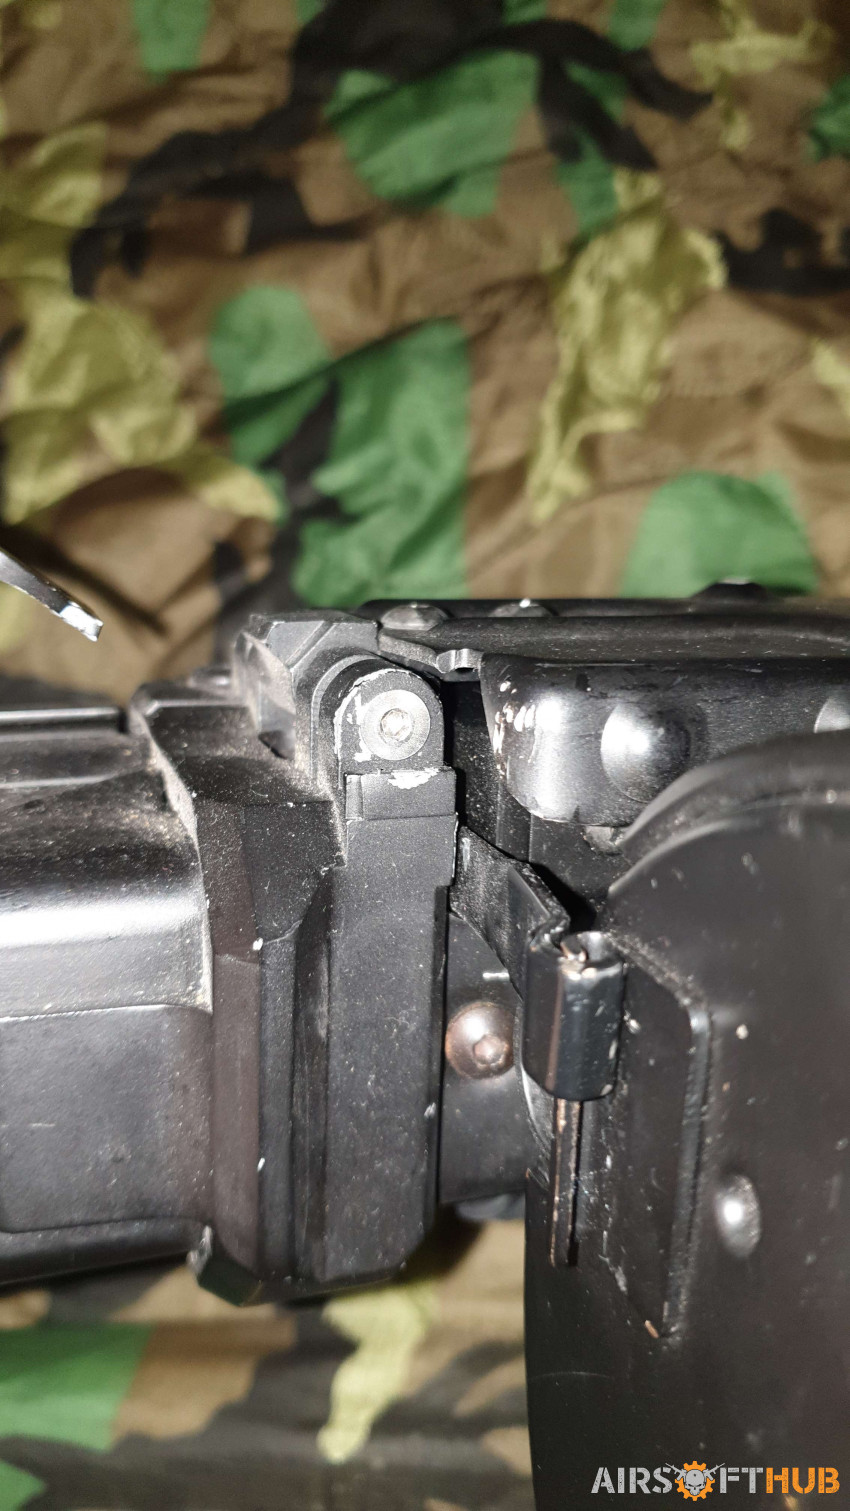 AGM MG42 - Used airsoft equipment